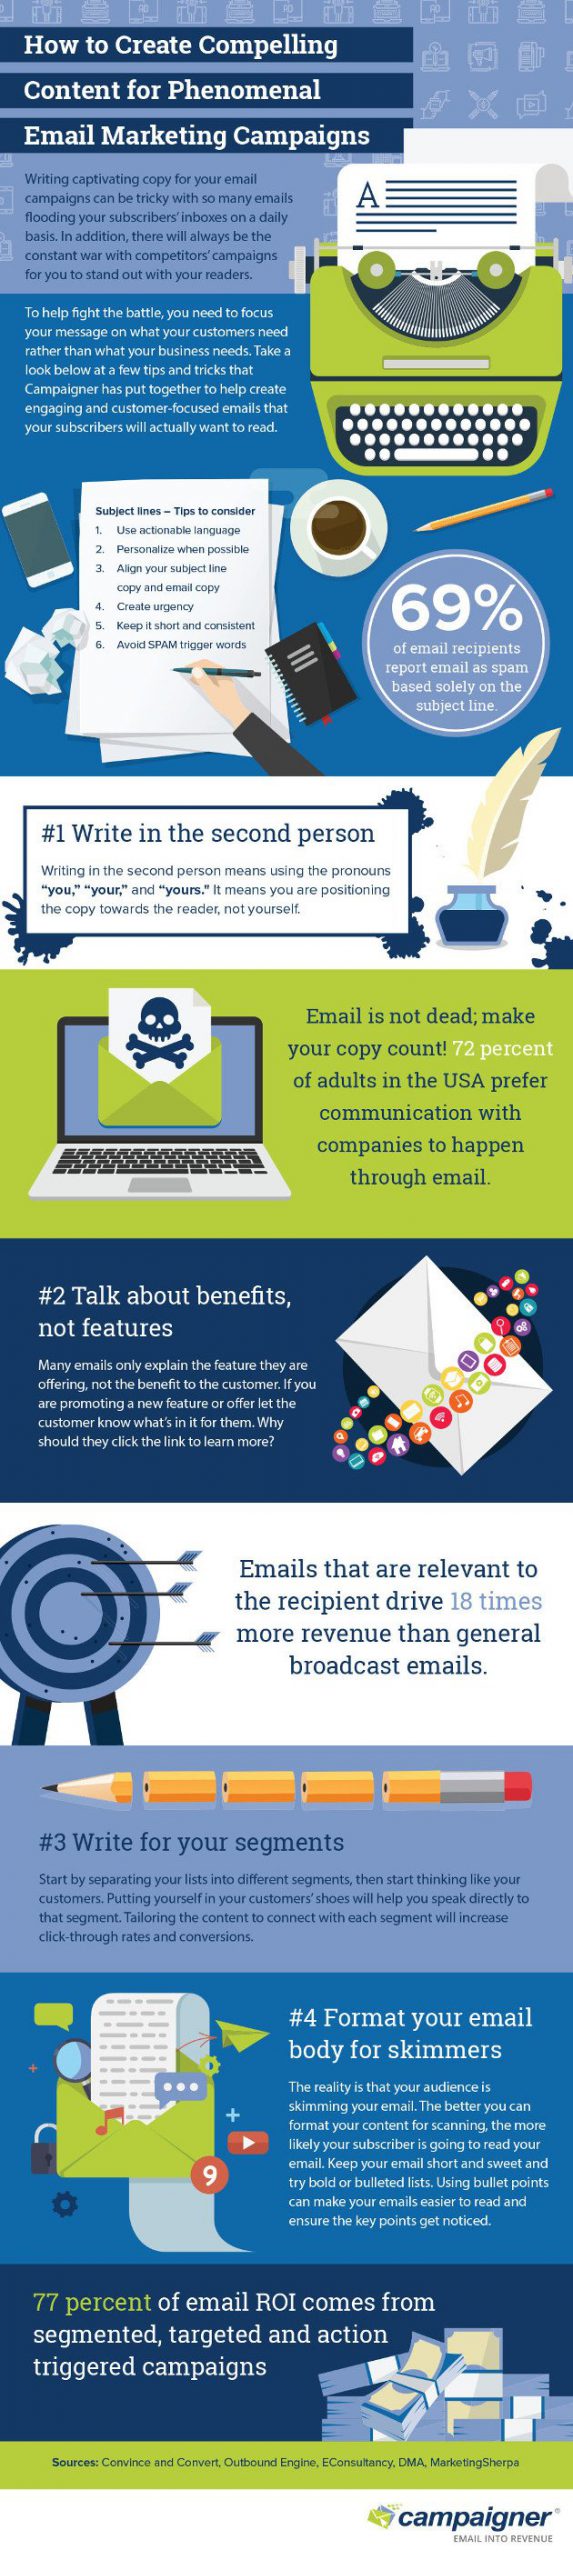 how to create compelling content for phenomenal email marketing campaigns infographic scaled 1